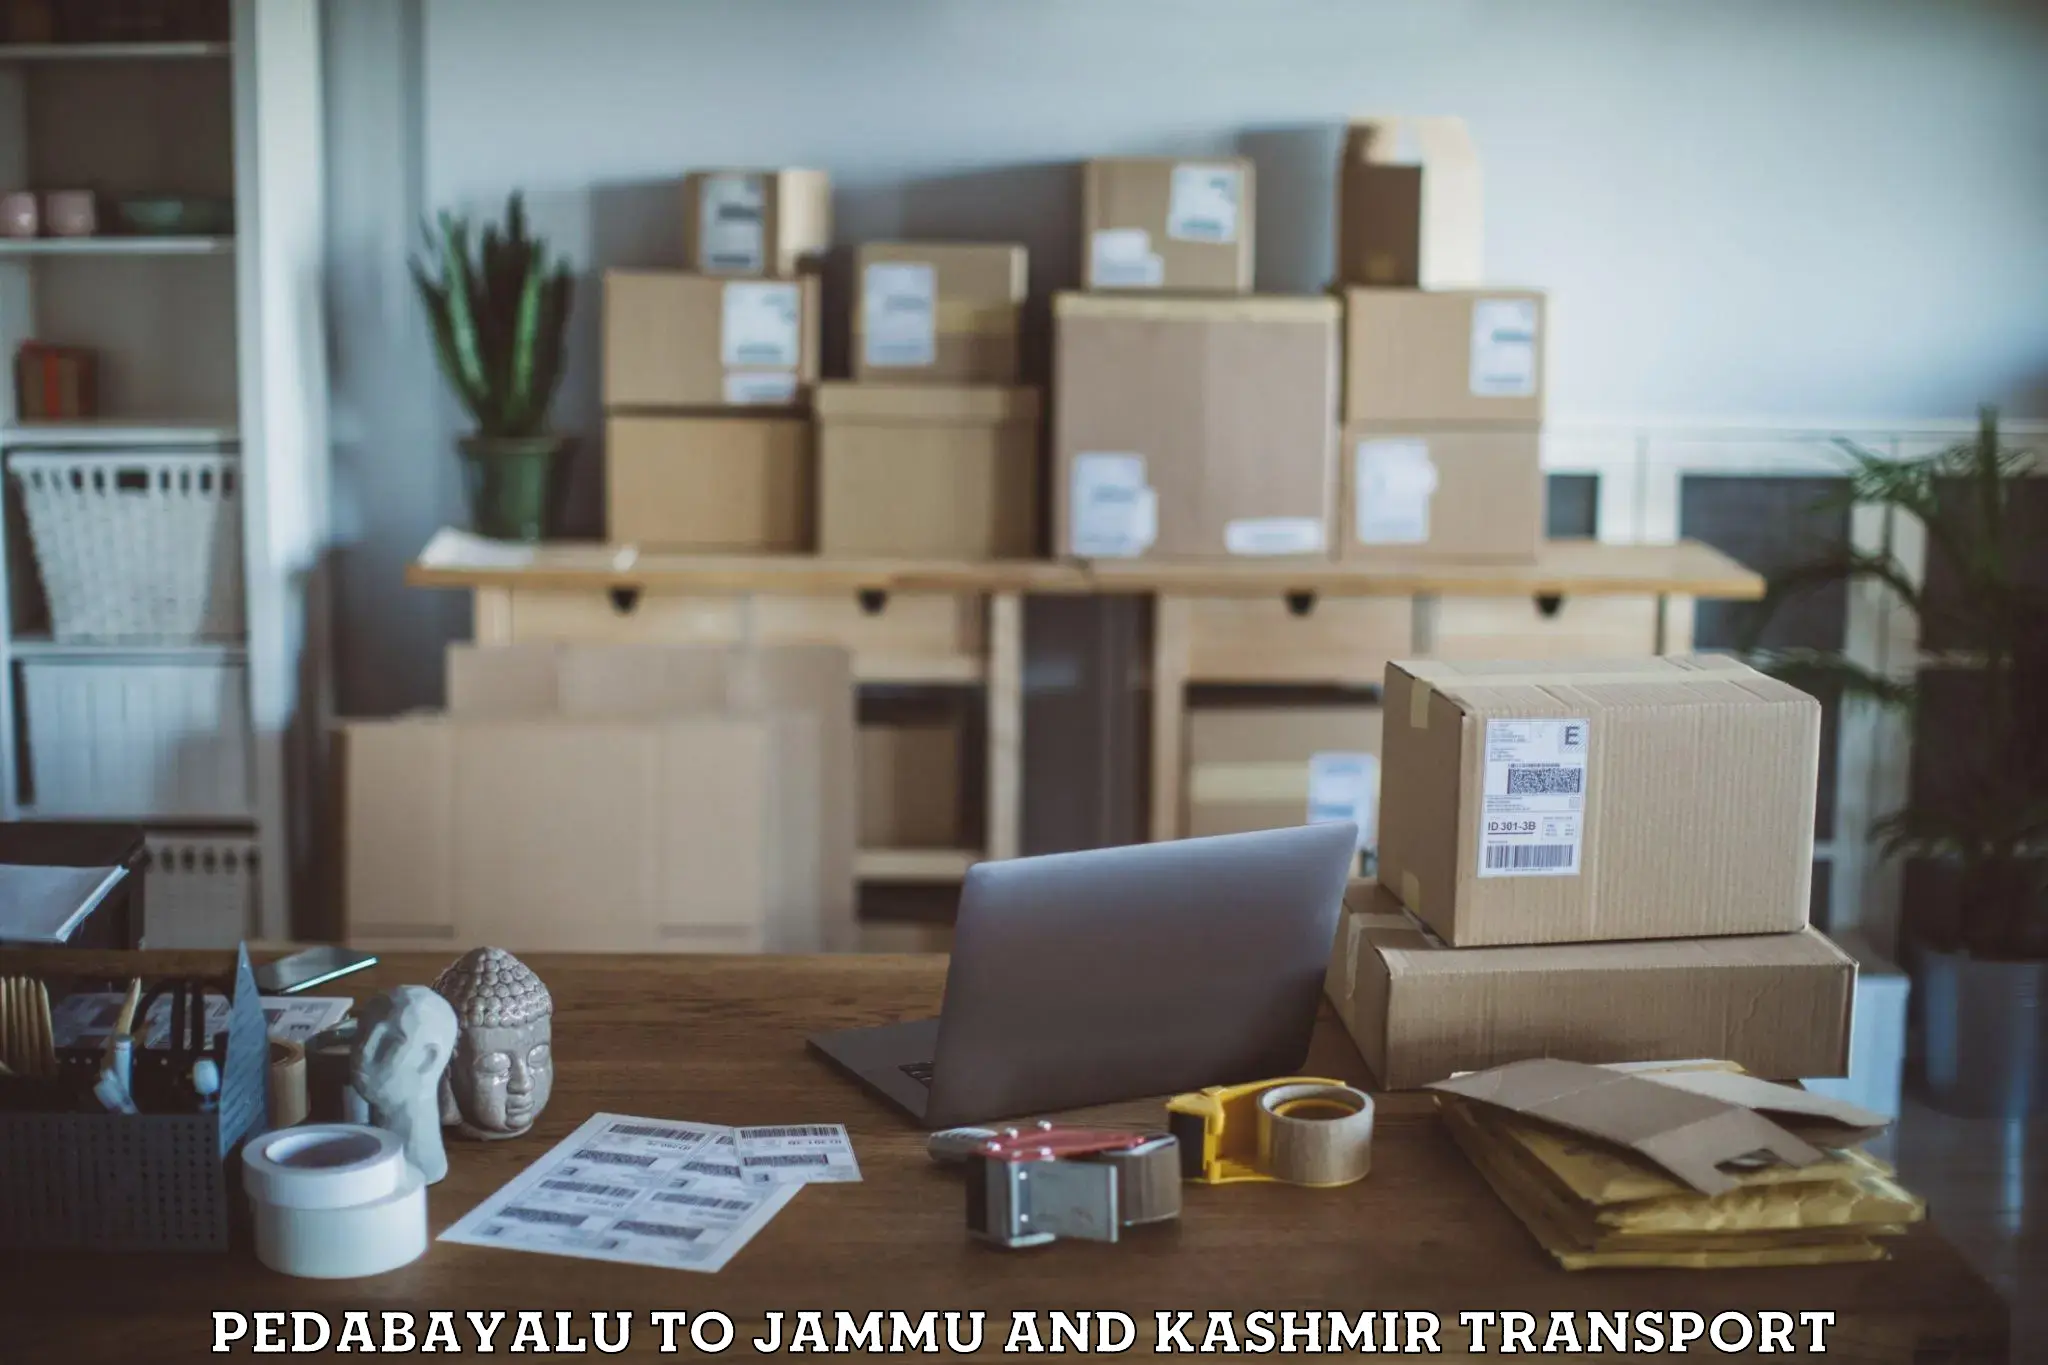 Transport bike from one state to another Pedabayalu to Jammu and Kashmir